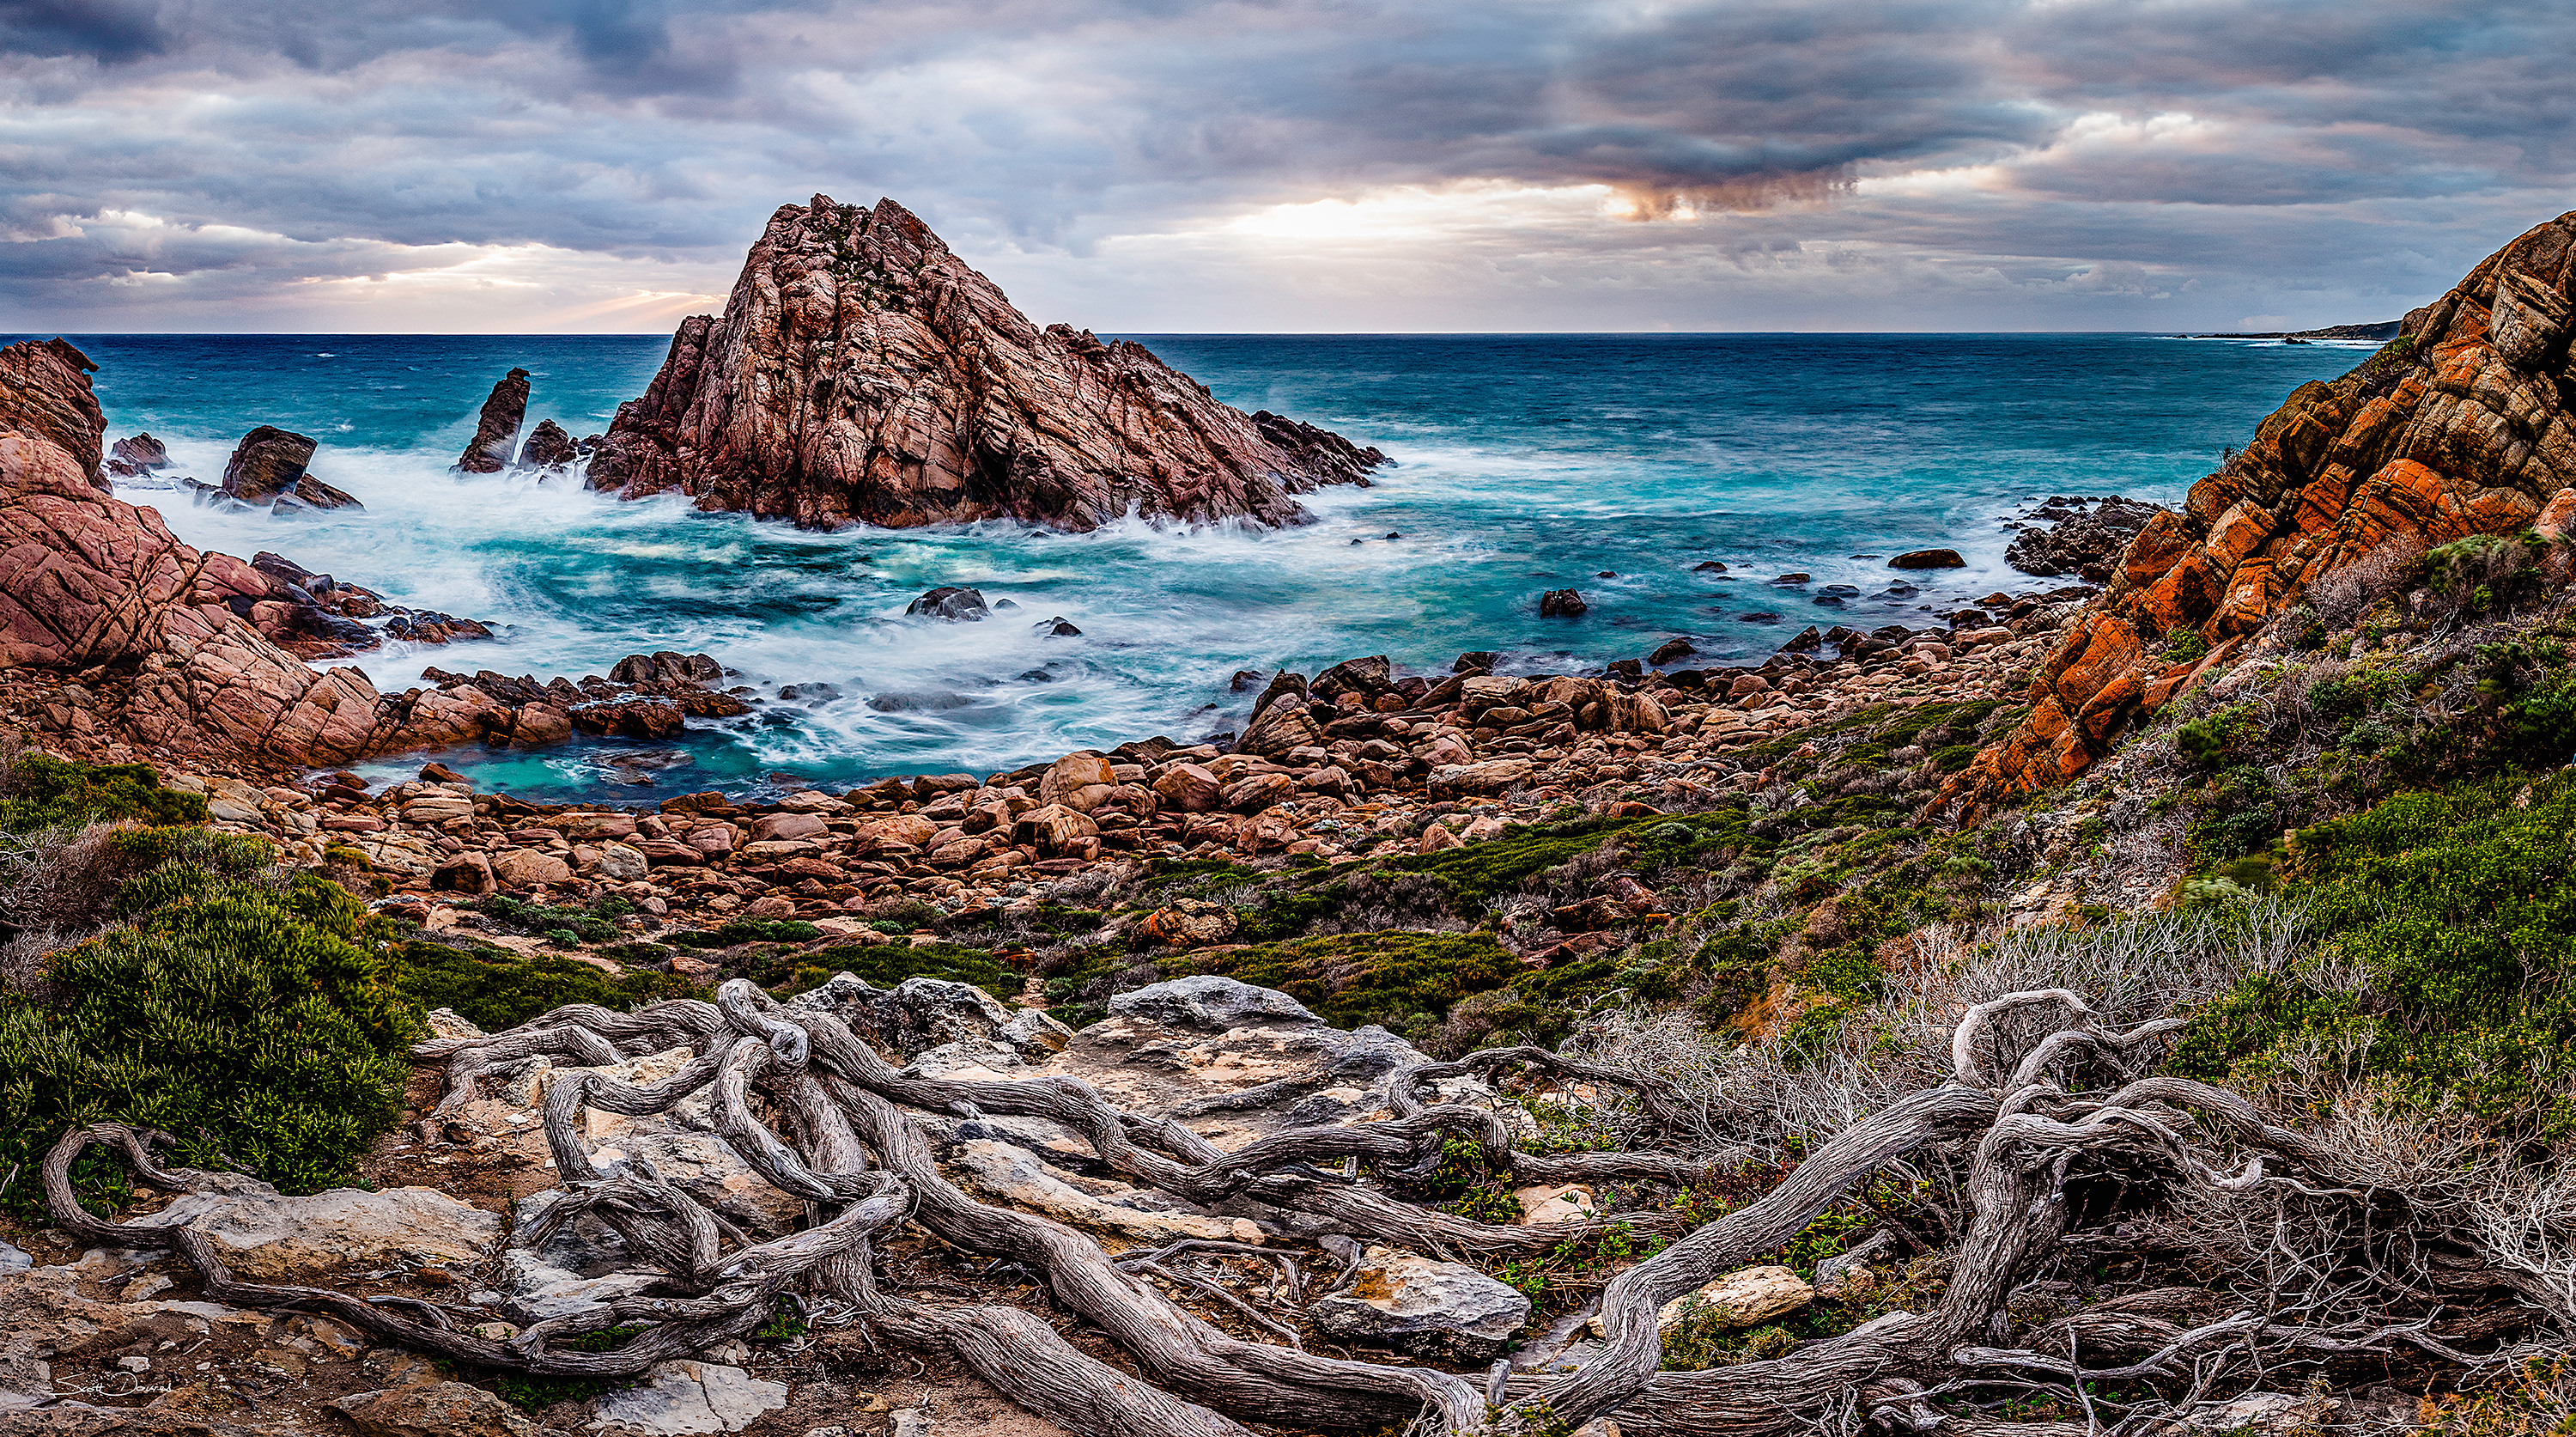 The Roots of Sugar Loaf Rock